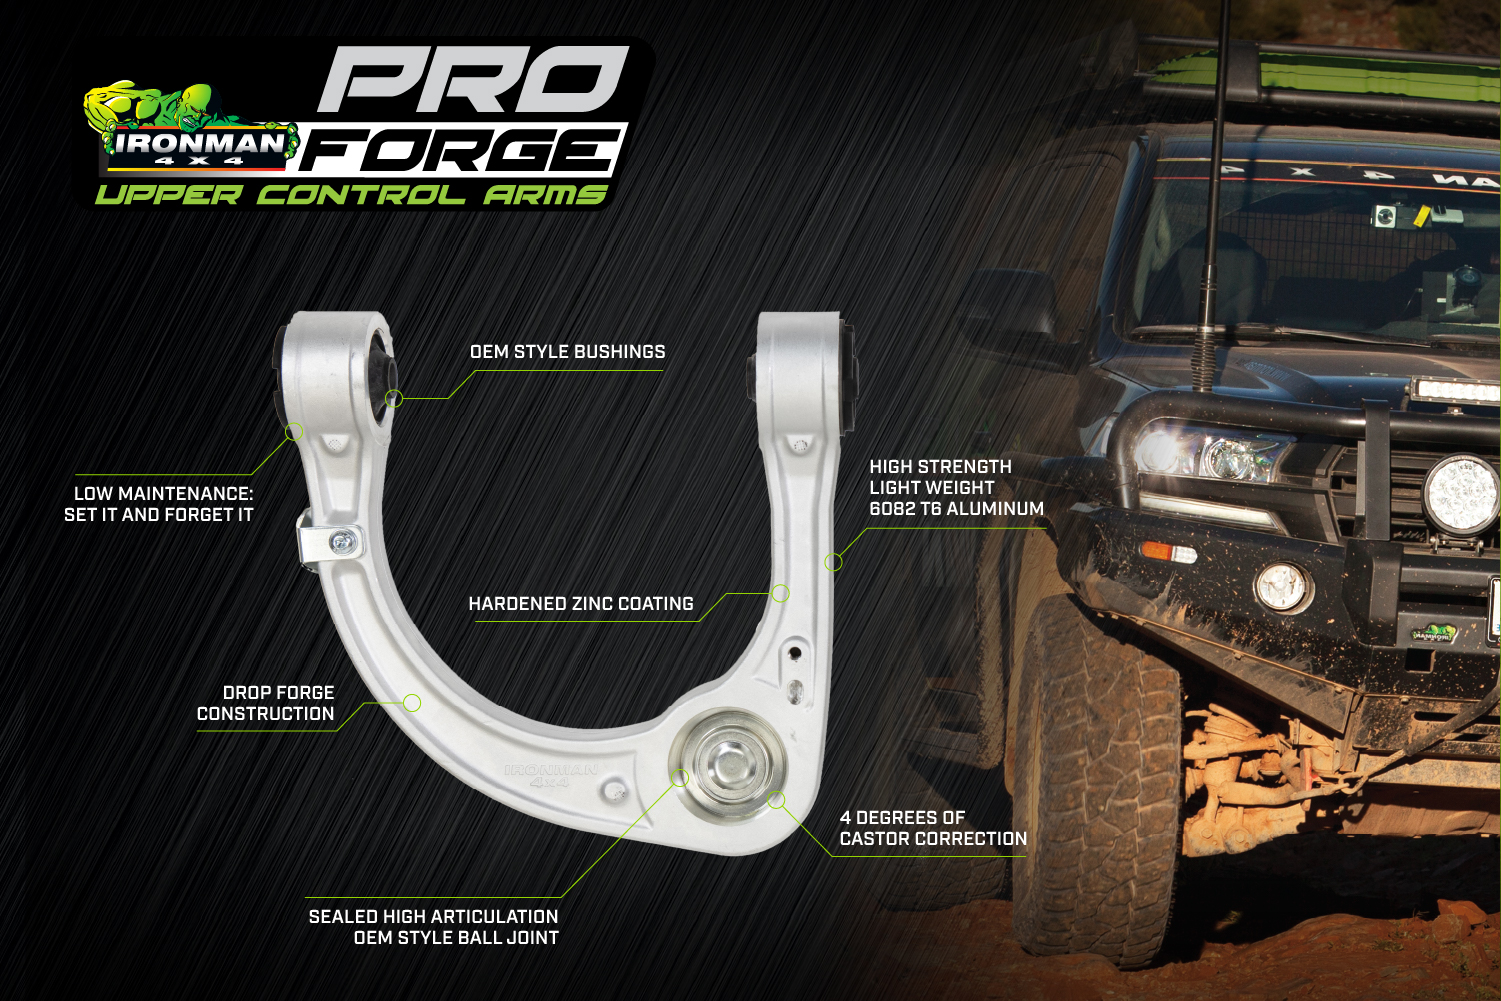 Pro Forge Upper Control Arms Suited For 2008+ Toyota 200 Series Land Cruiser / Lexus LX570 Questions & Answers